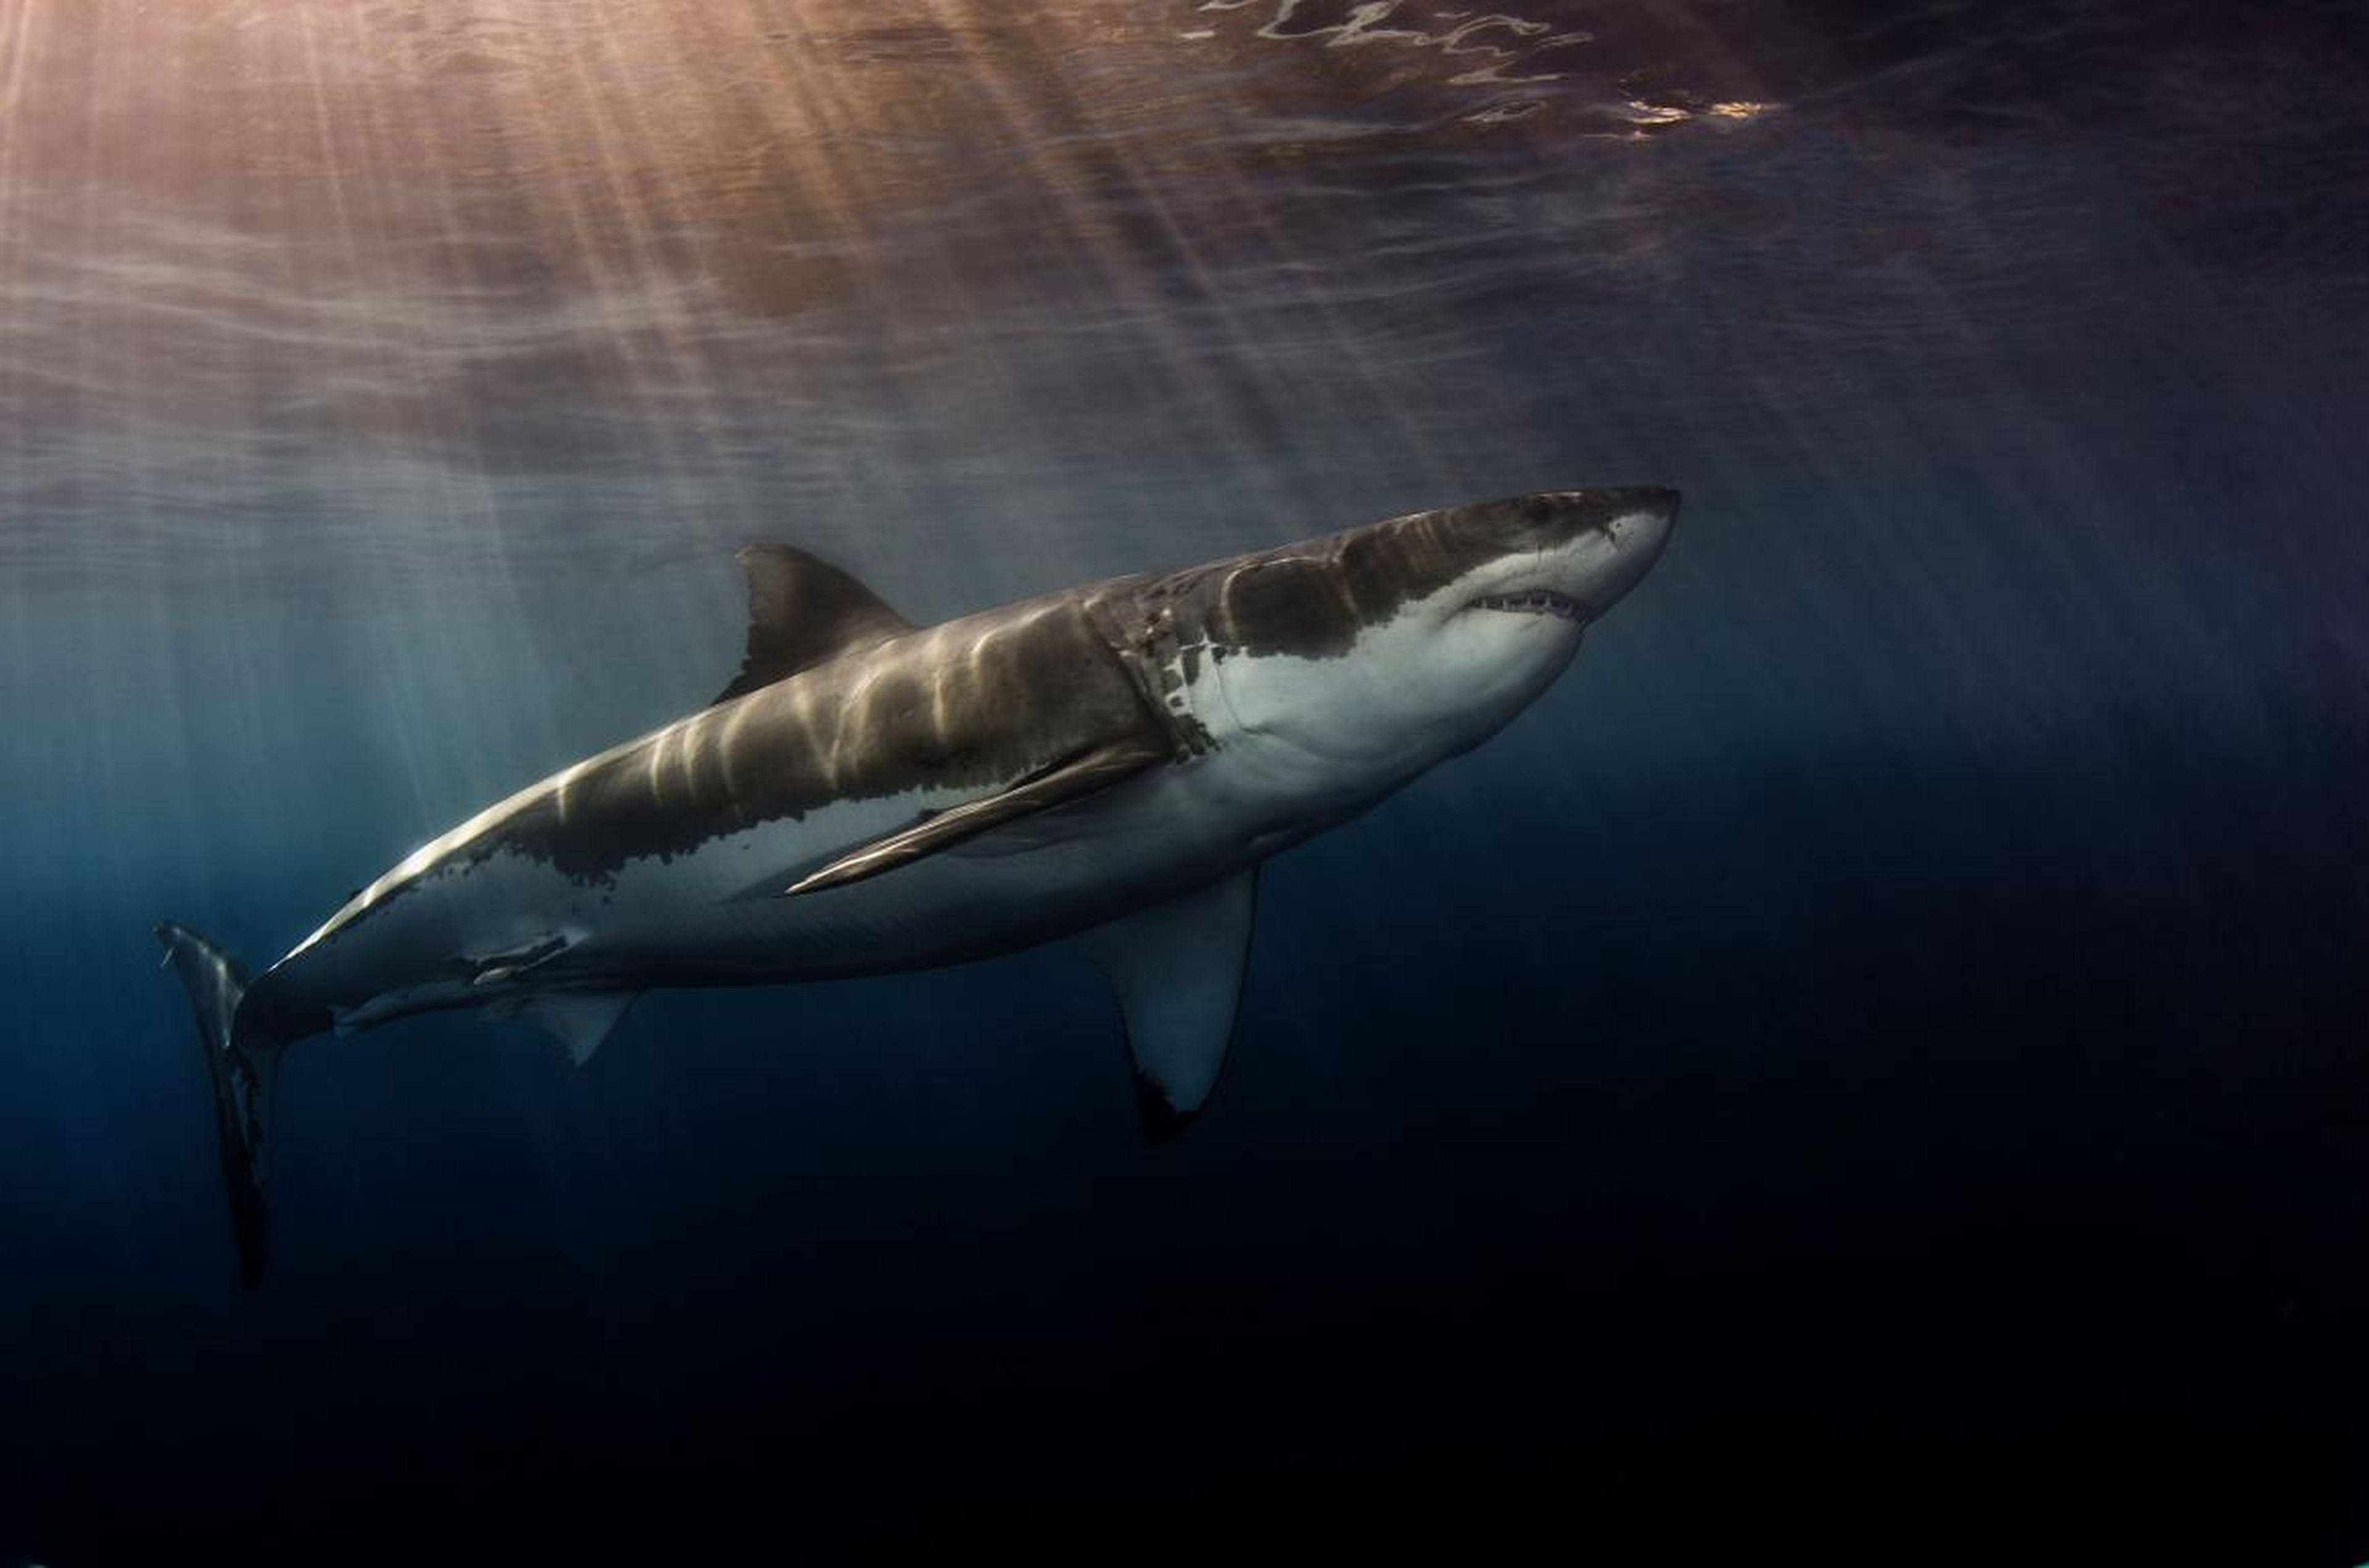 The "Shark" category is always a fan favorite. Photographer Steve Andersen took home gold with this shot of a great white swimming near Guadalupe, Mexico.